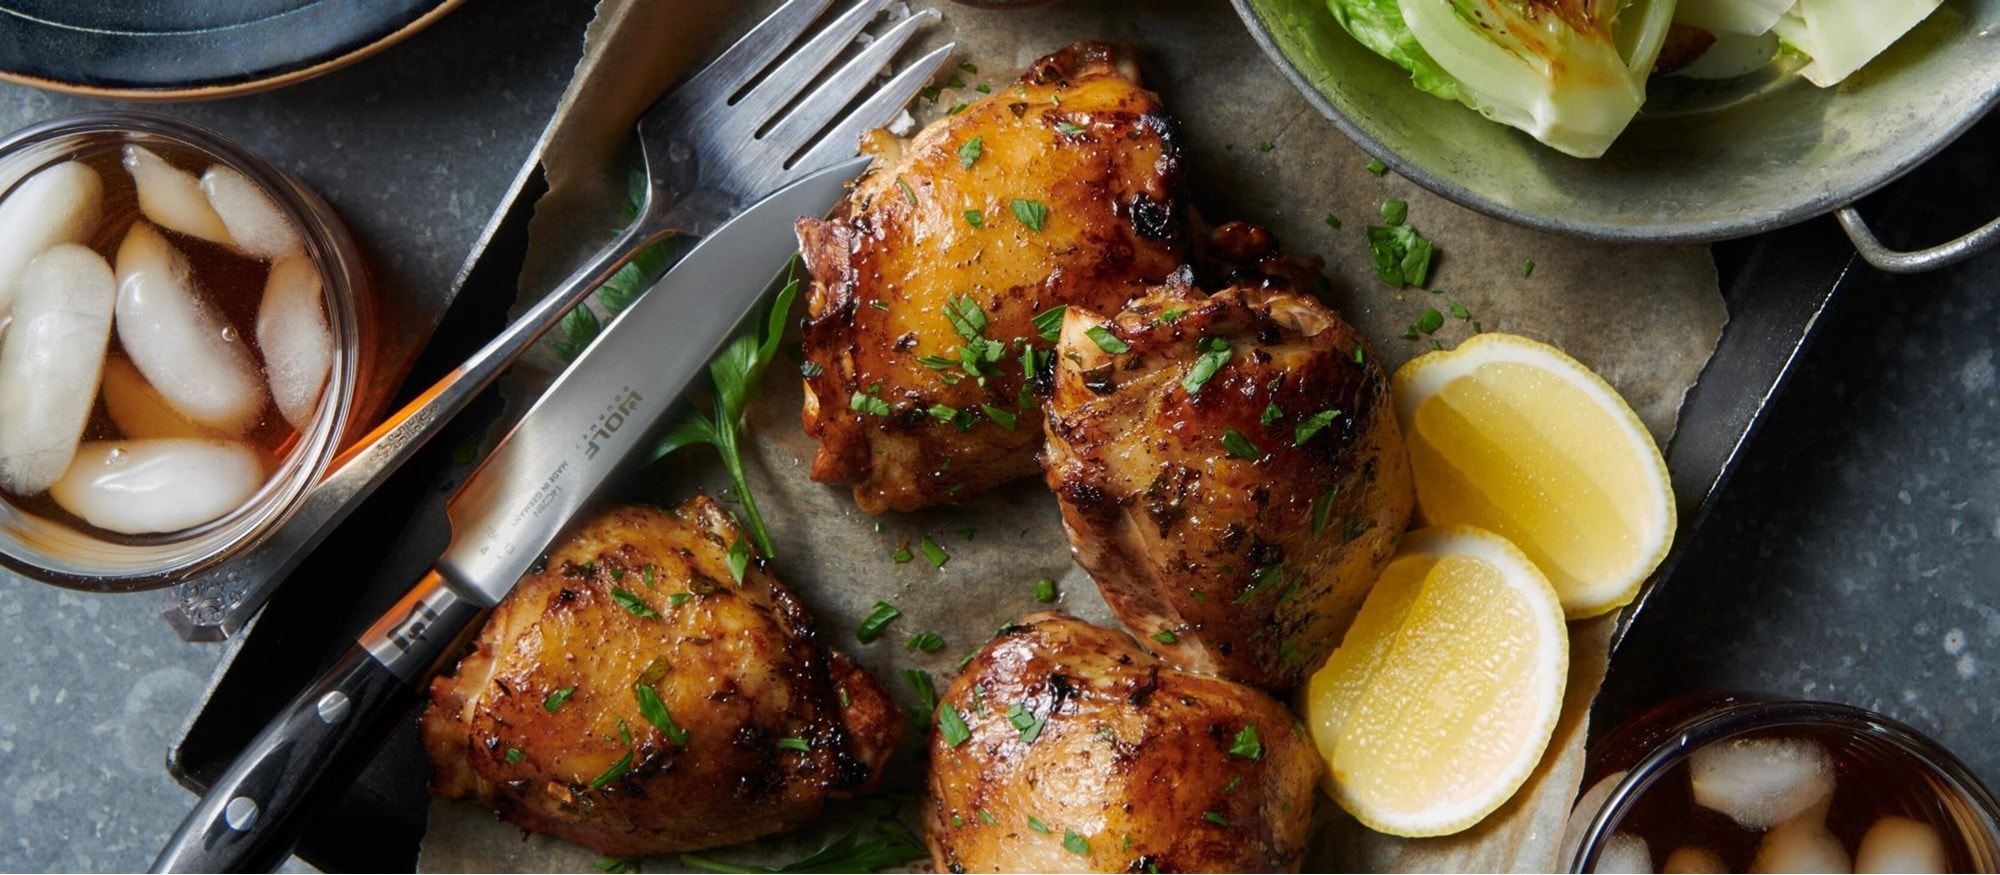 Easy and delicious Marinated Chicken Thighs recipe using the Convection Mode setting of your Wolf Oven